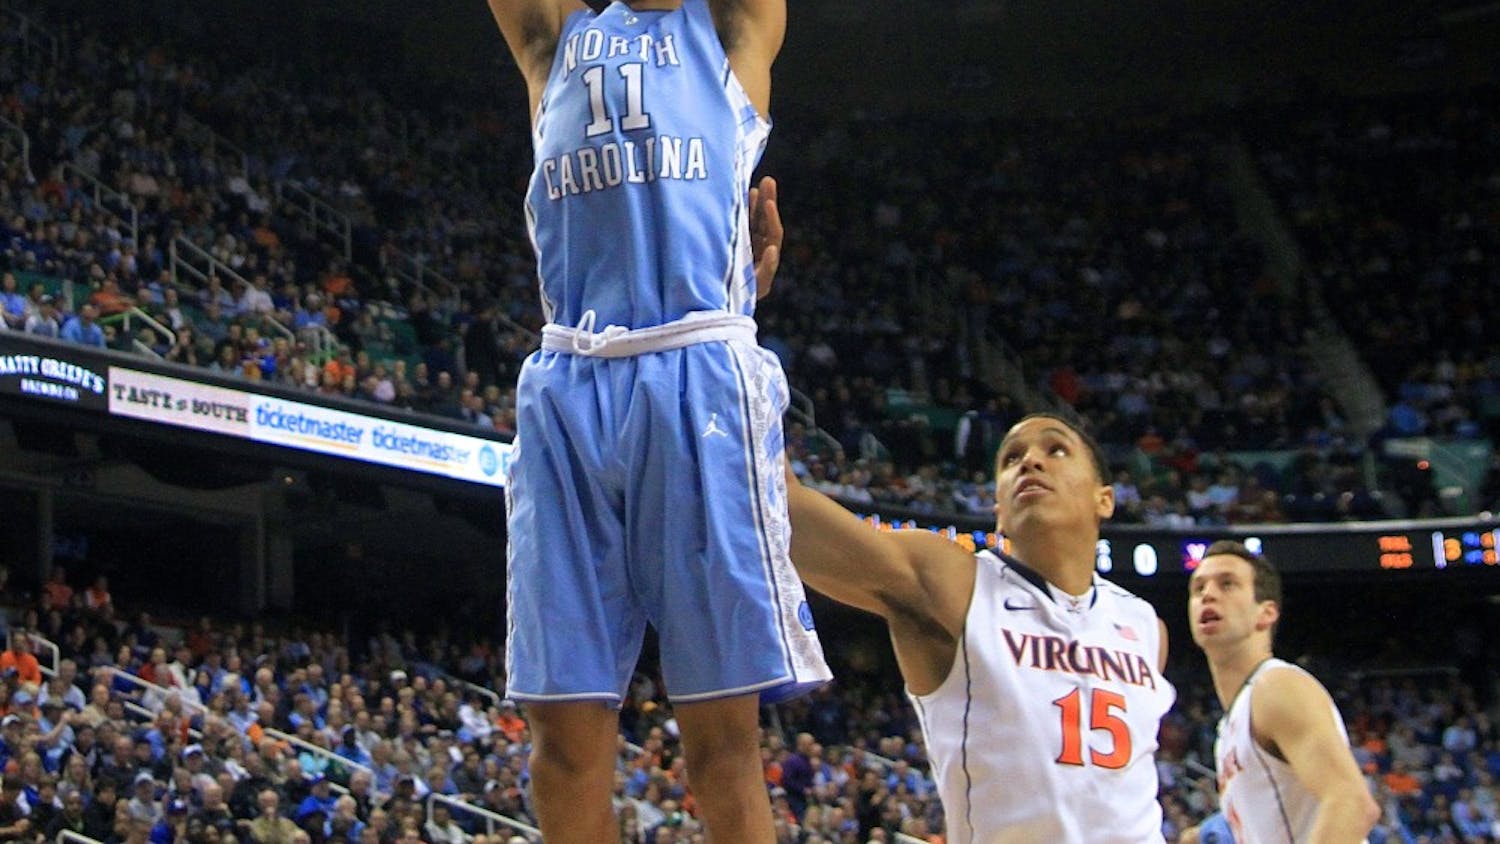 Junior forward Brice Johnson (11) dunks the ball in the first half. Johnson scored 13 points and grabbed six rebounds during Friday night's matchup against Virginia.